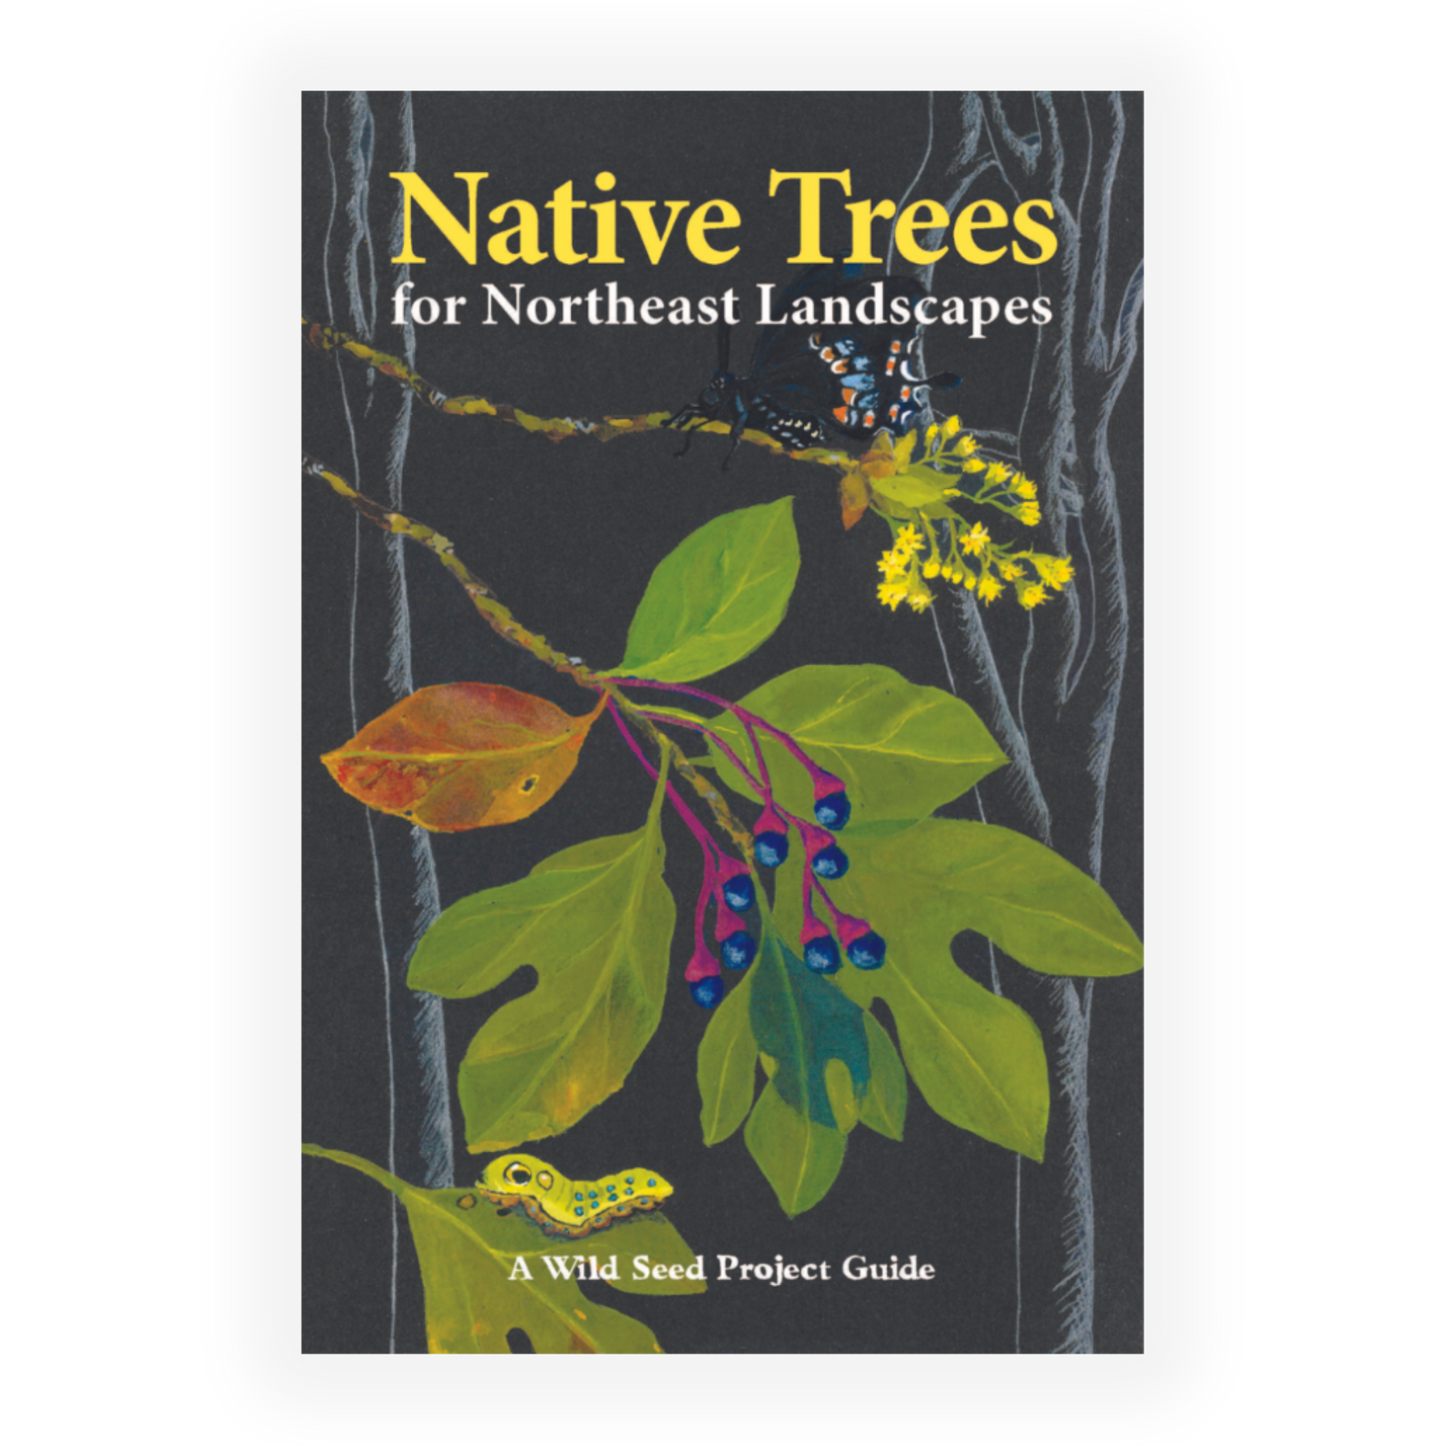 Native Trees for Northeast Landscapes: A Wild Seed Project Guide